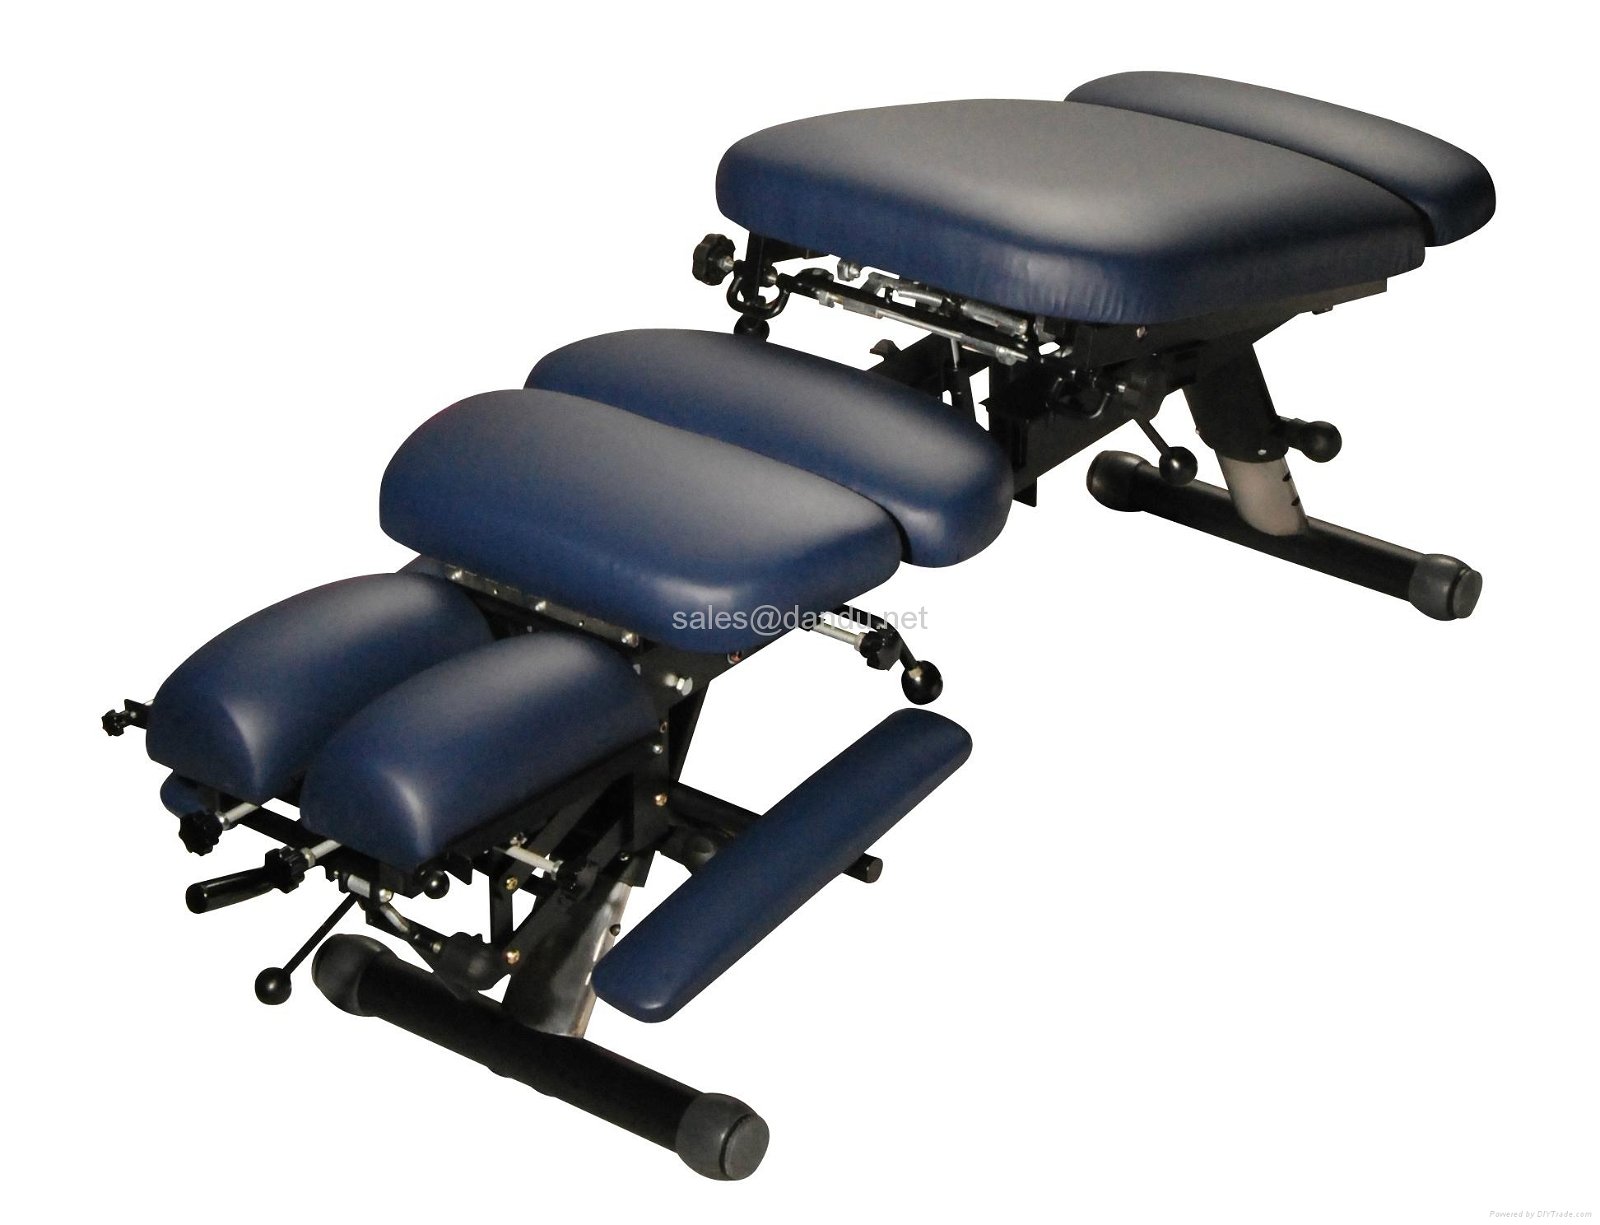 Stationary Chiropractic bench /table 2